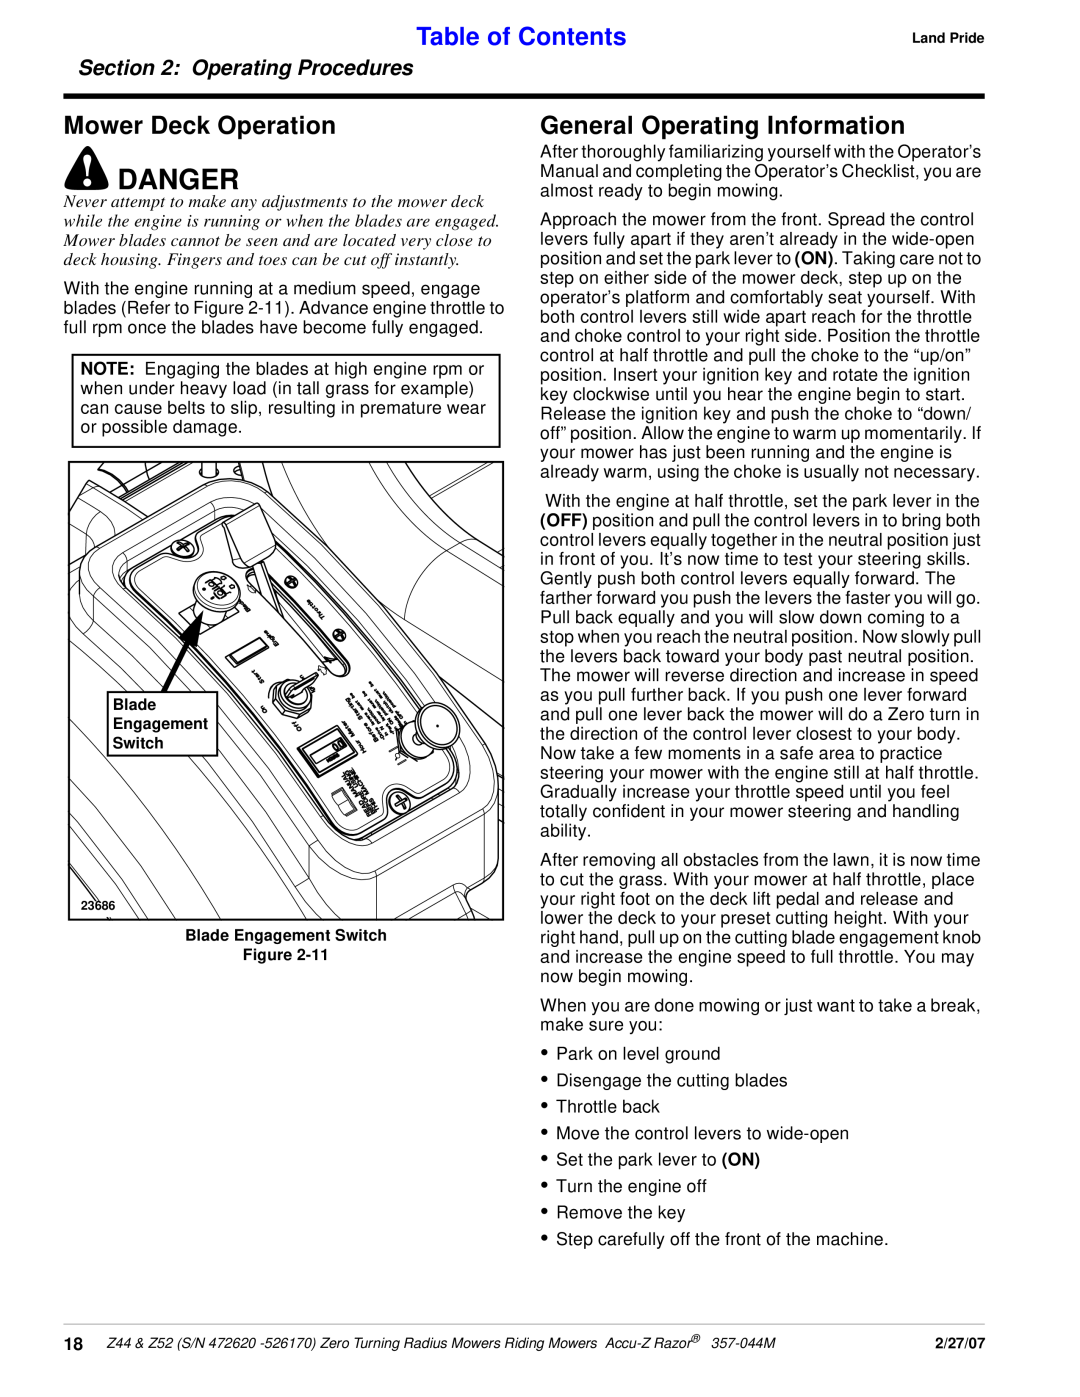 Land Pride 357-044M Mower Deck Operation, General Operating Information, Danger, Table of Contents, Operating Procedures 